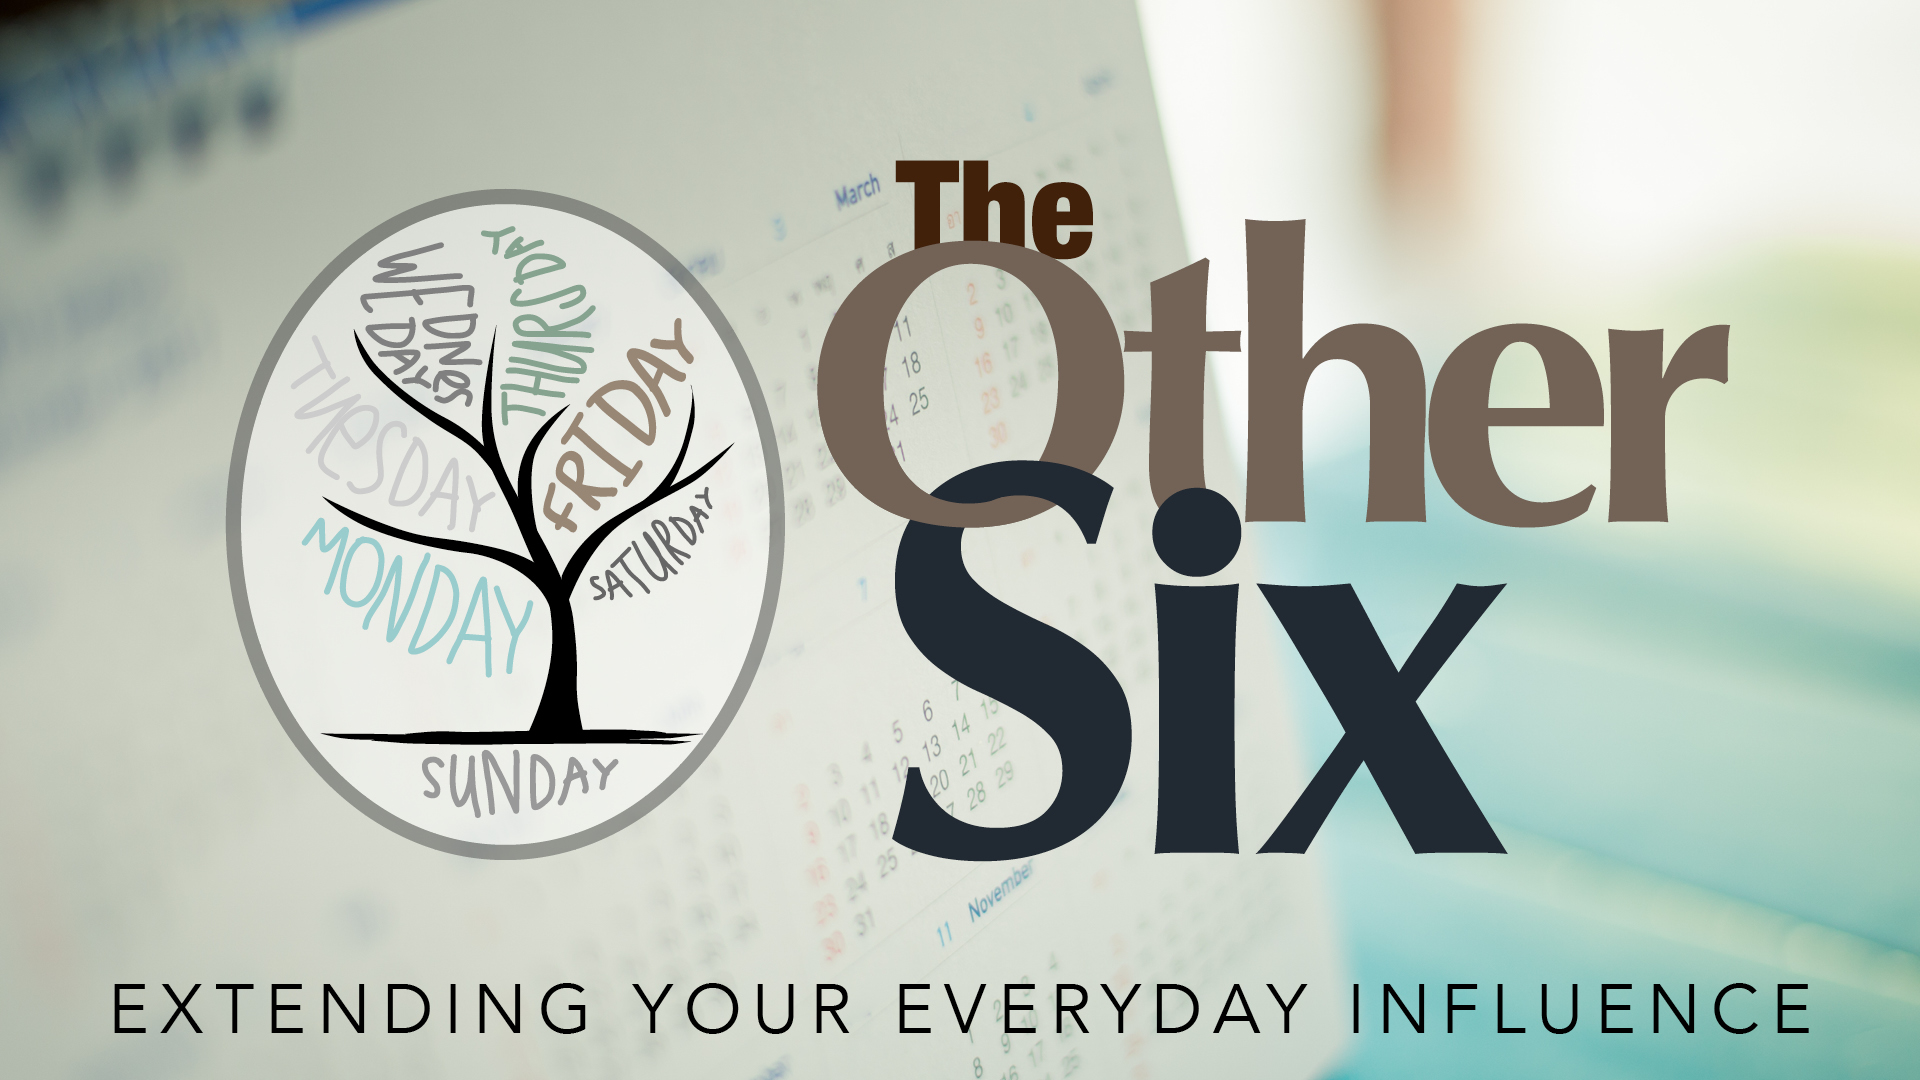 “The Other Six” Sermon Series
September 8 - October 28
